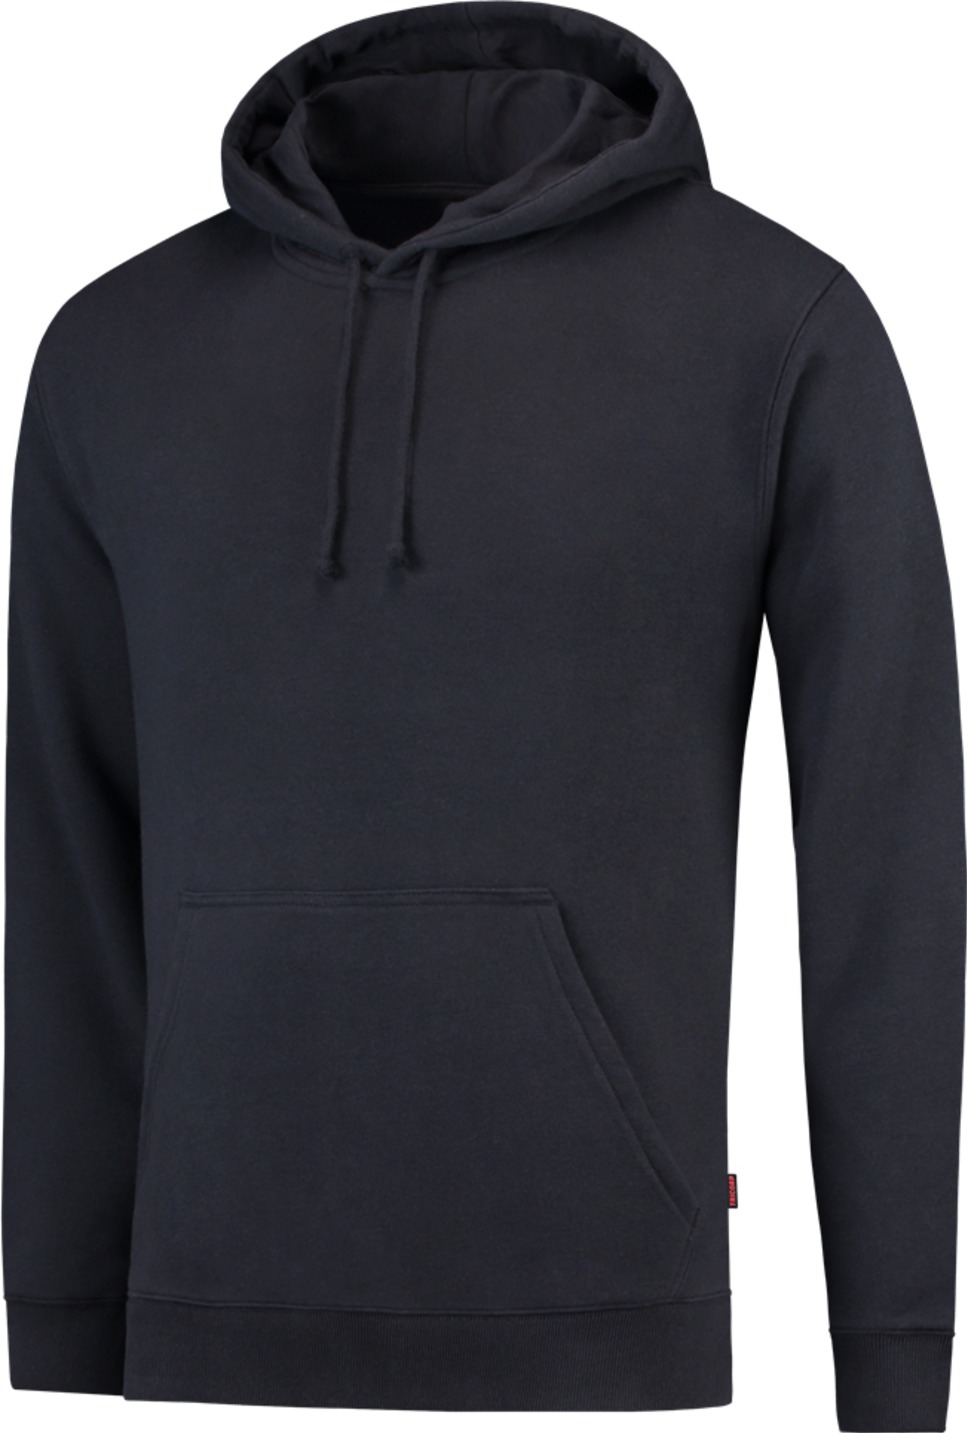 HS300 Hooded Sweater